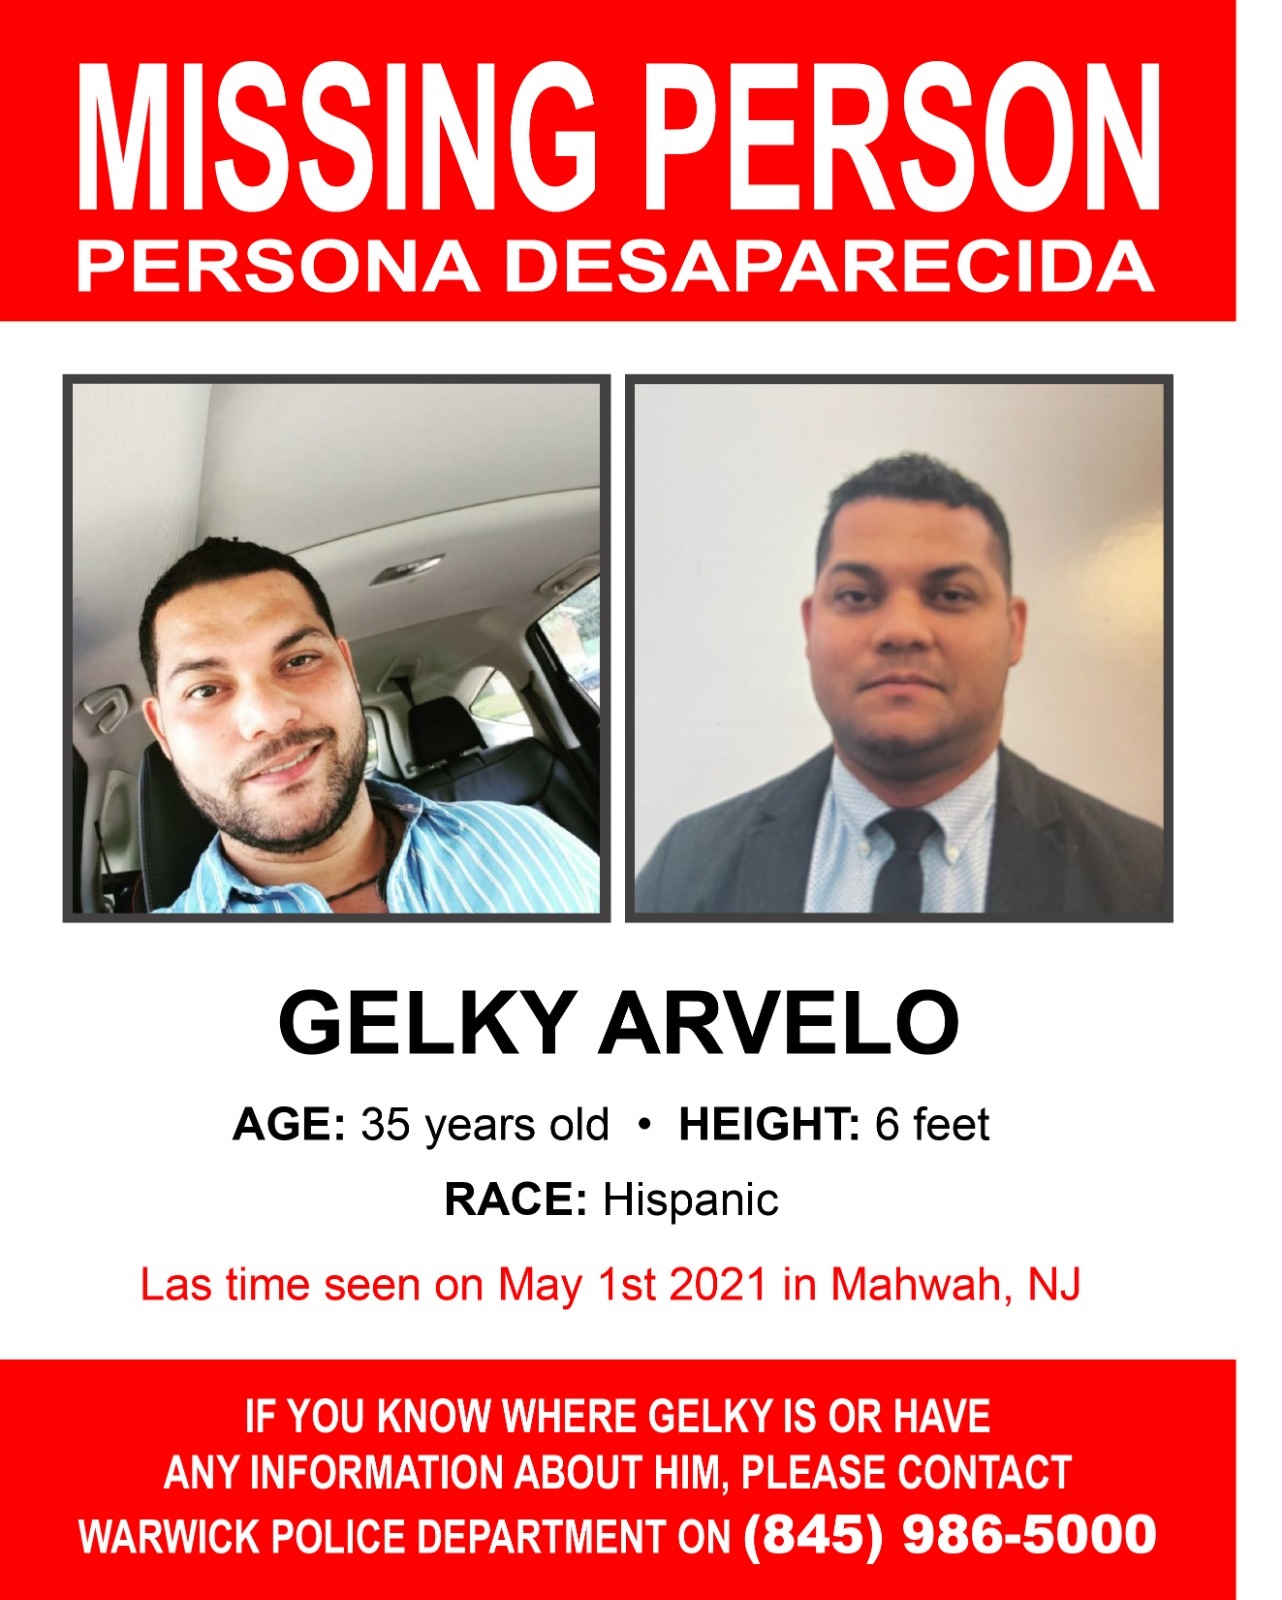 Photo_Missing Person Gelky Arvelo